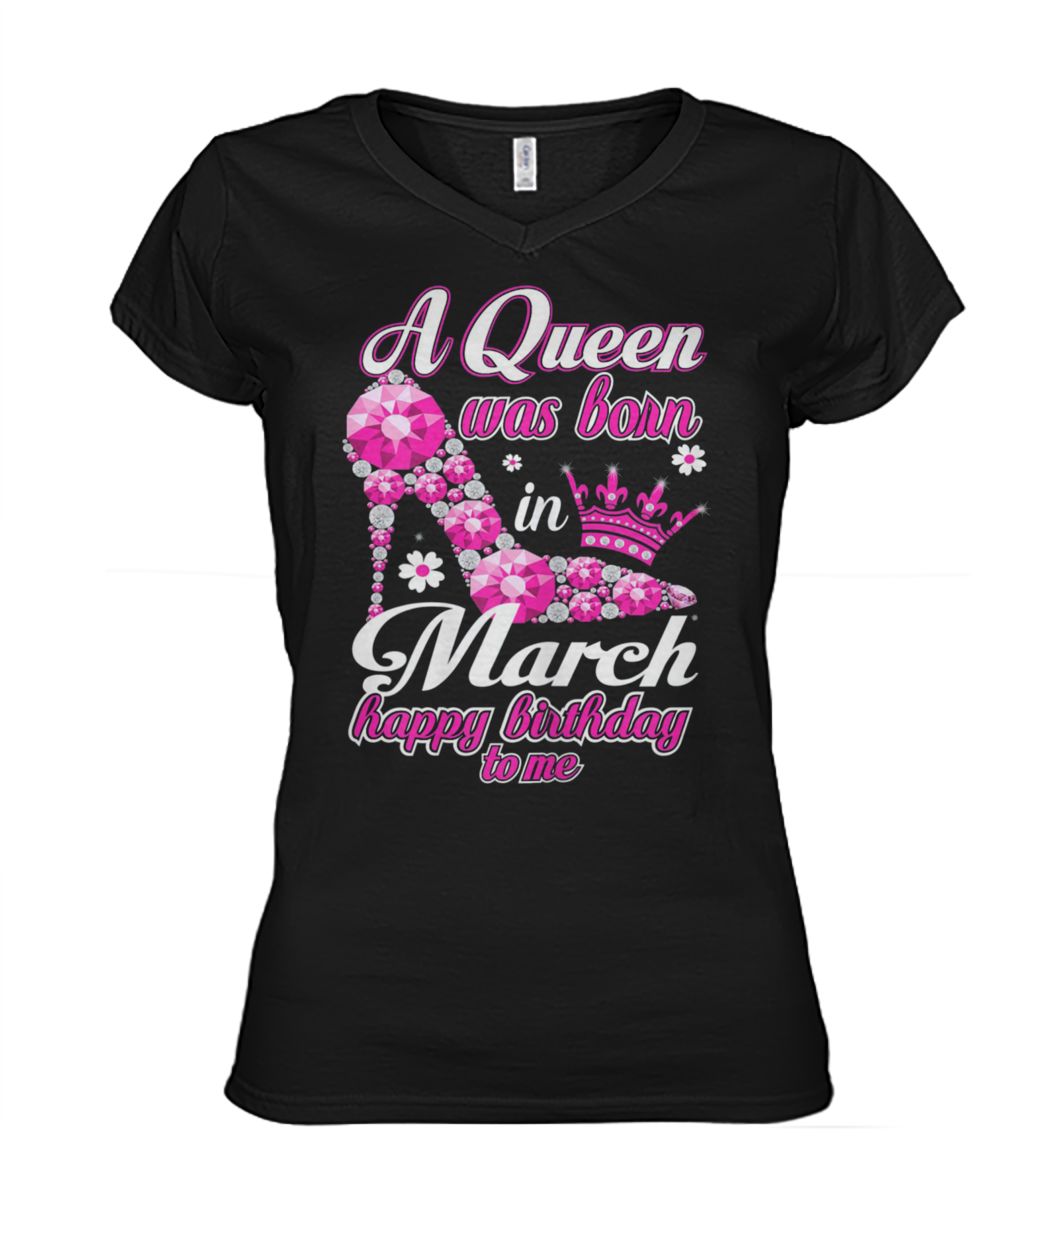 A queen was born in march happy birthday to me women's v-neck